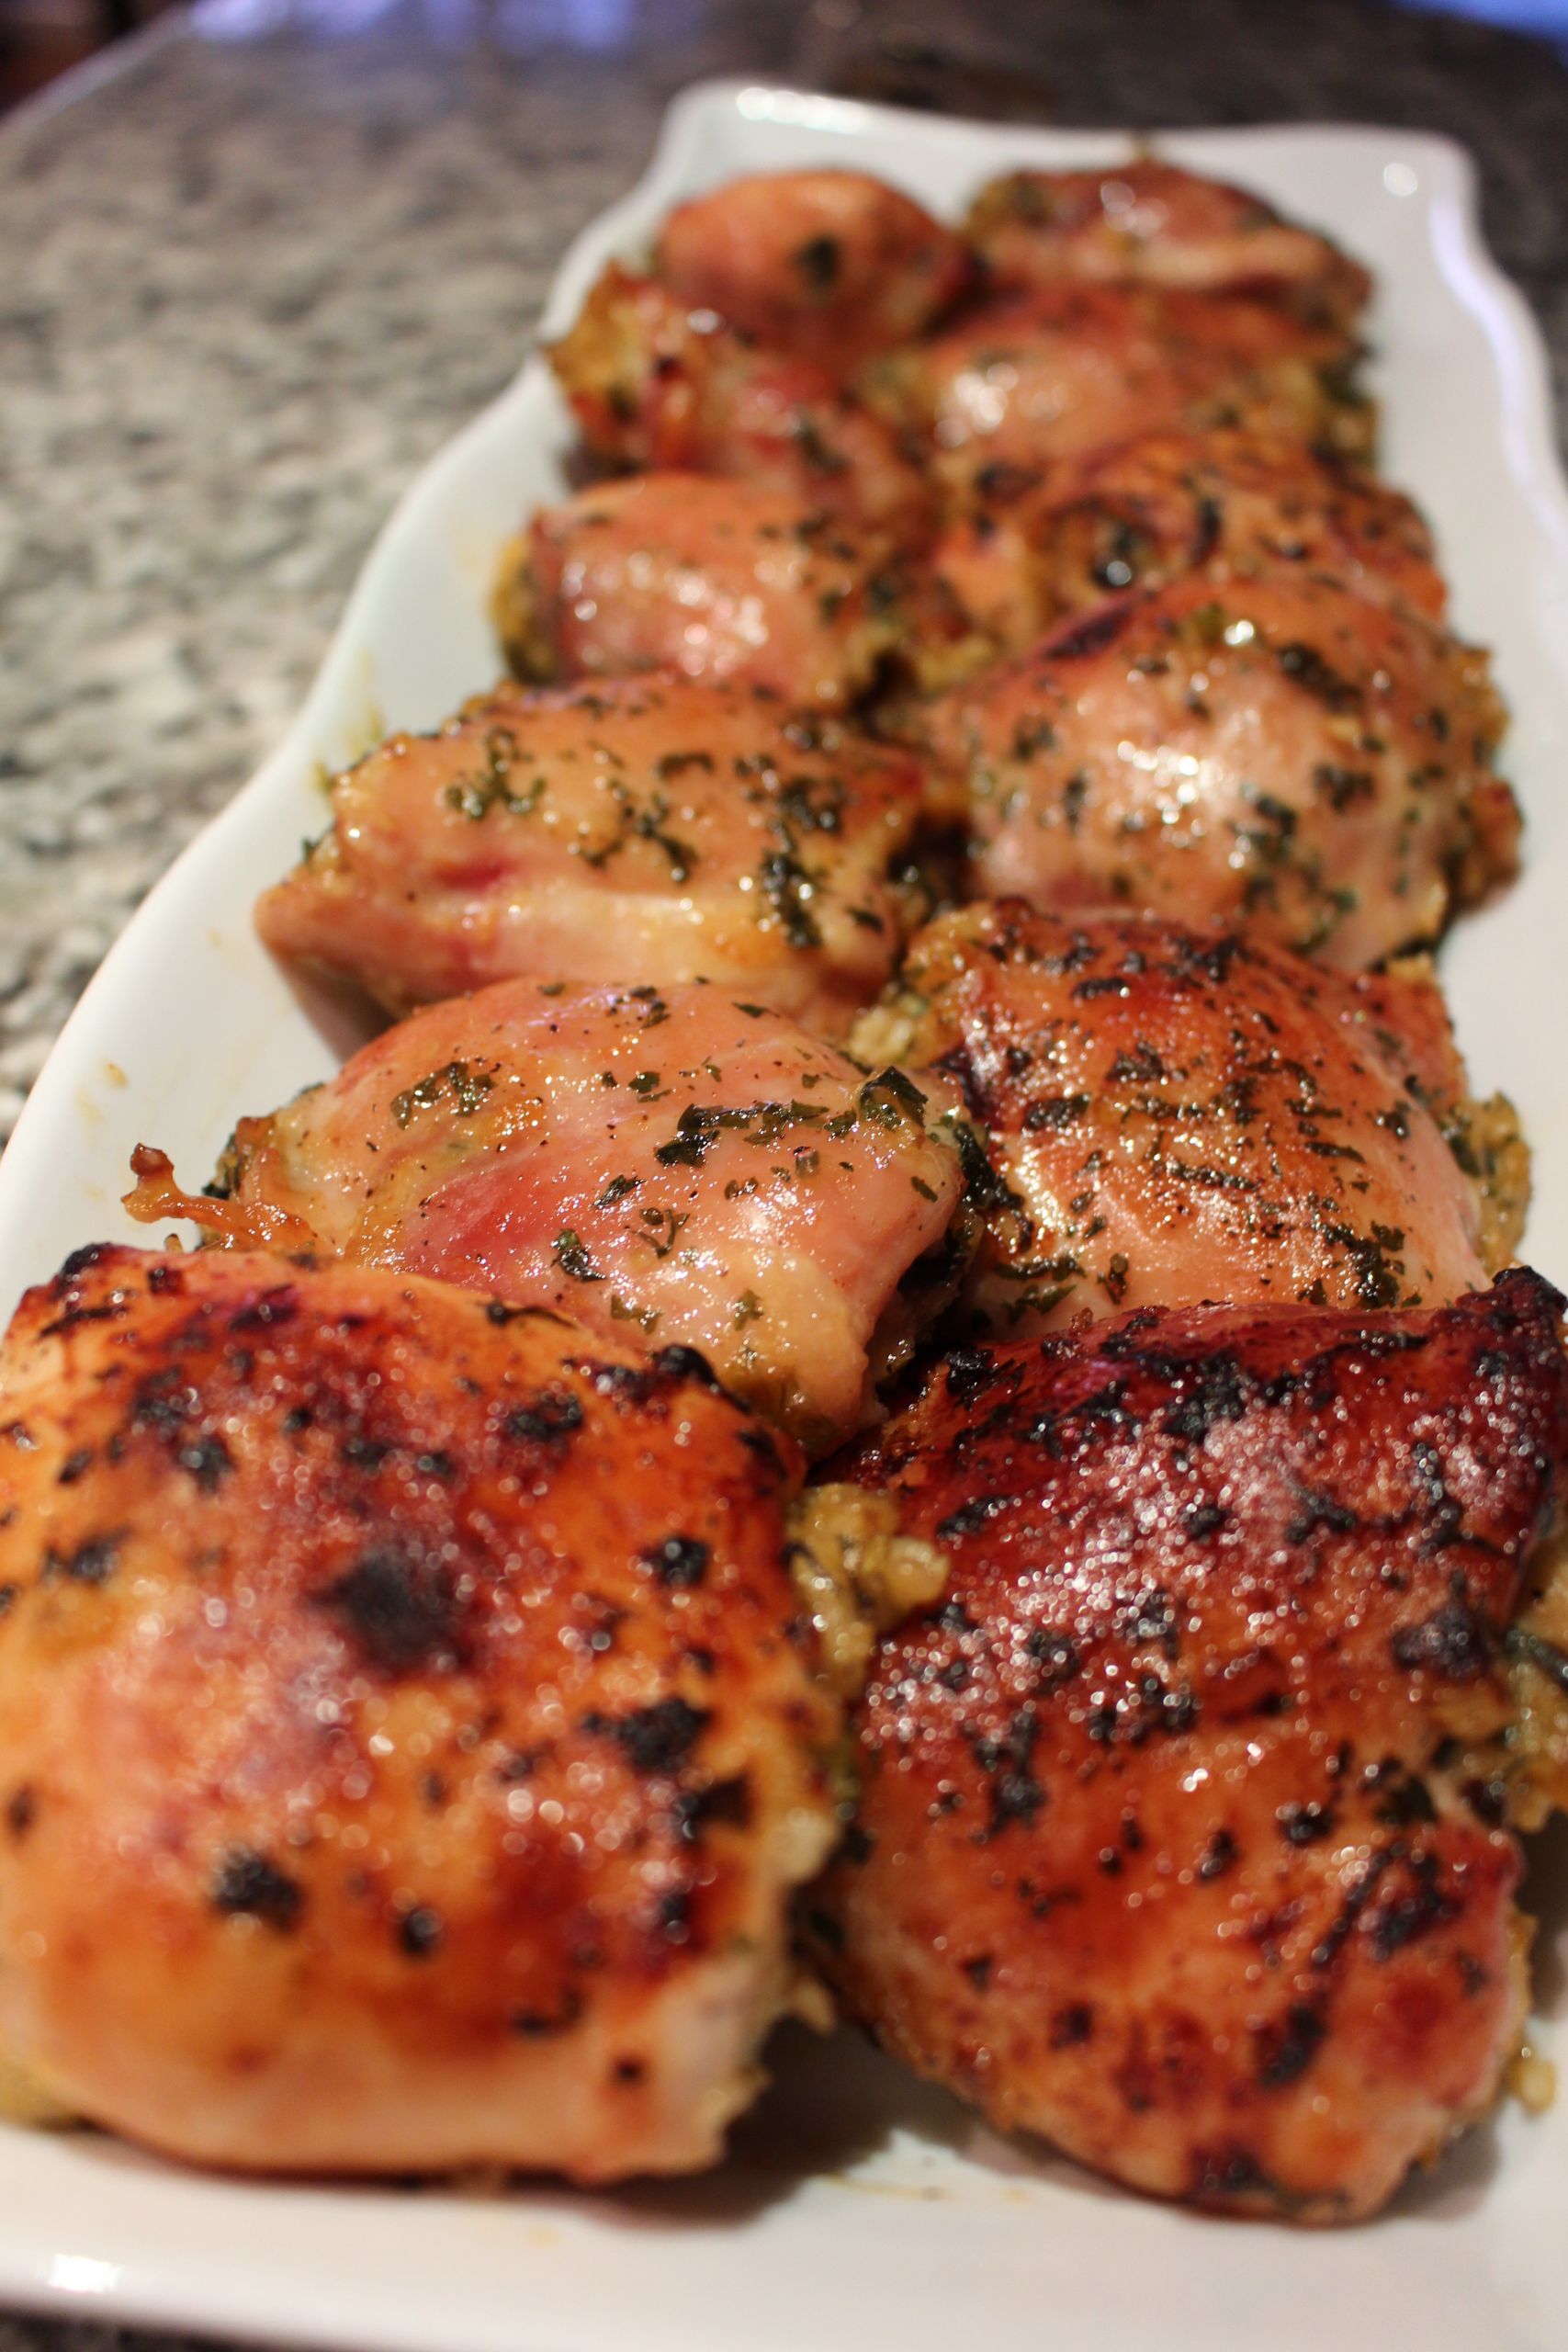 Recipes Using Chicken Thighs
 Stuffed Boneless Skinless Chicken Thighs – sisters who dish